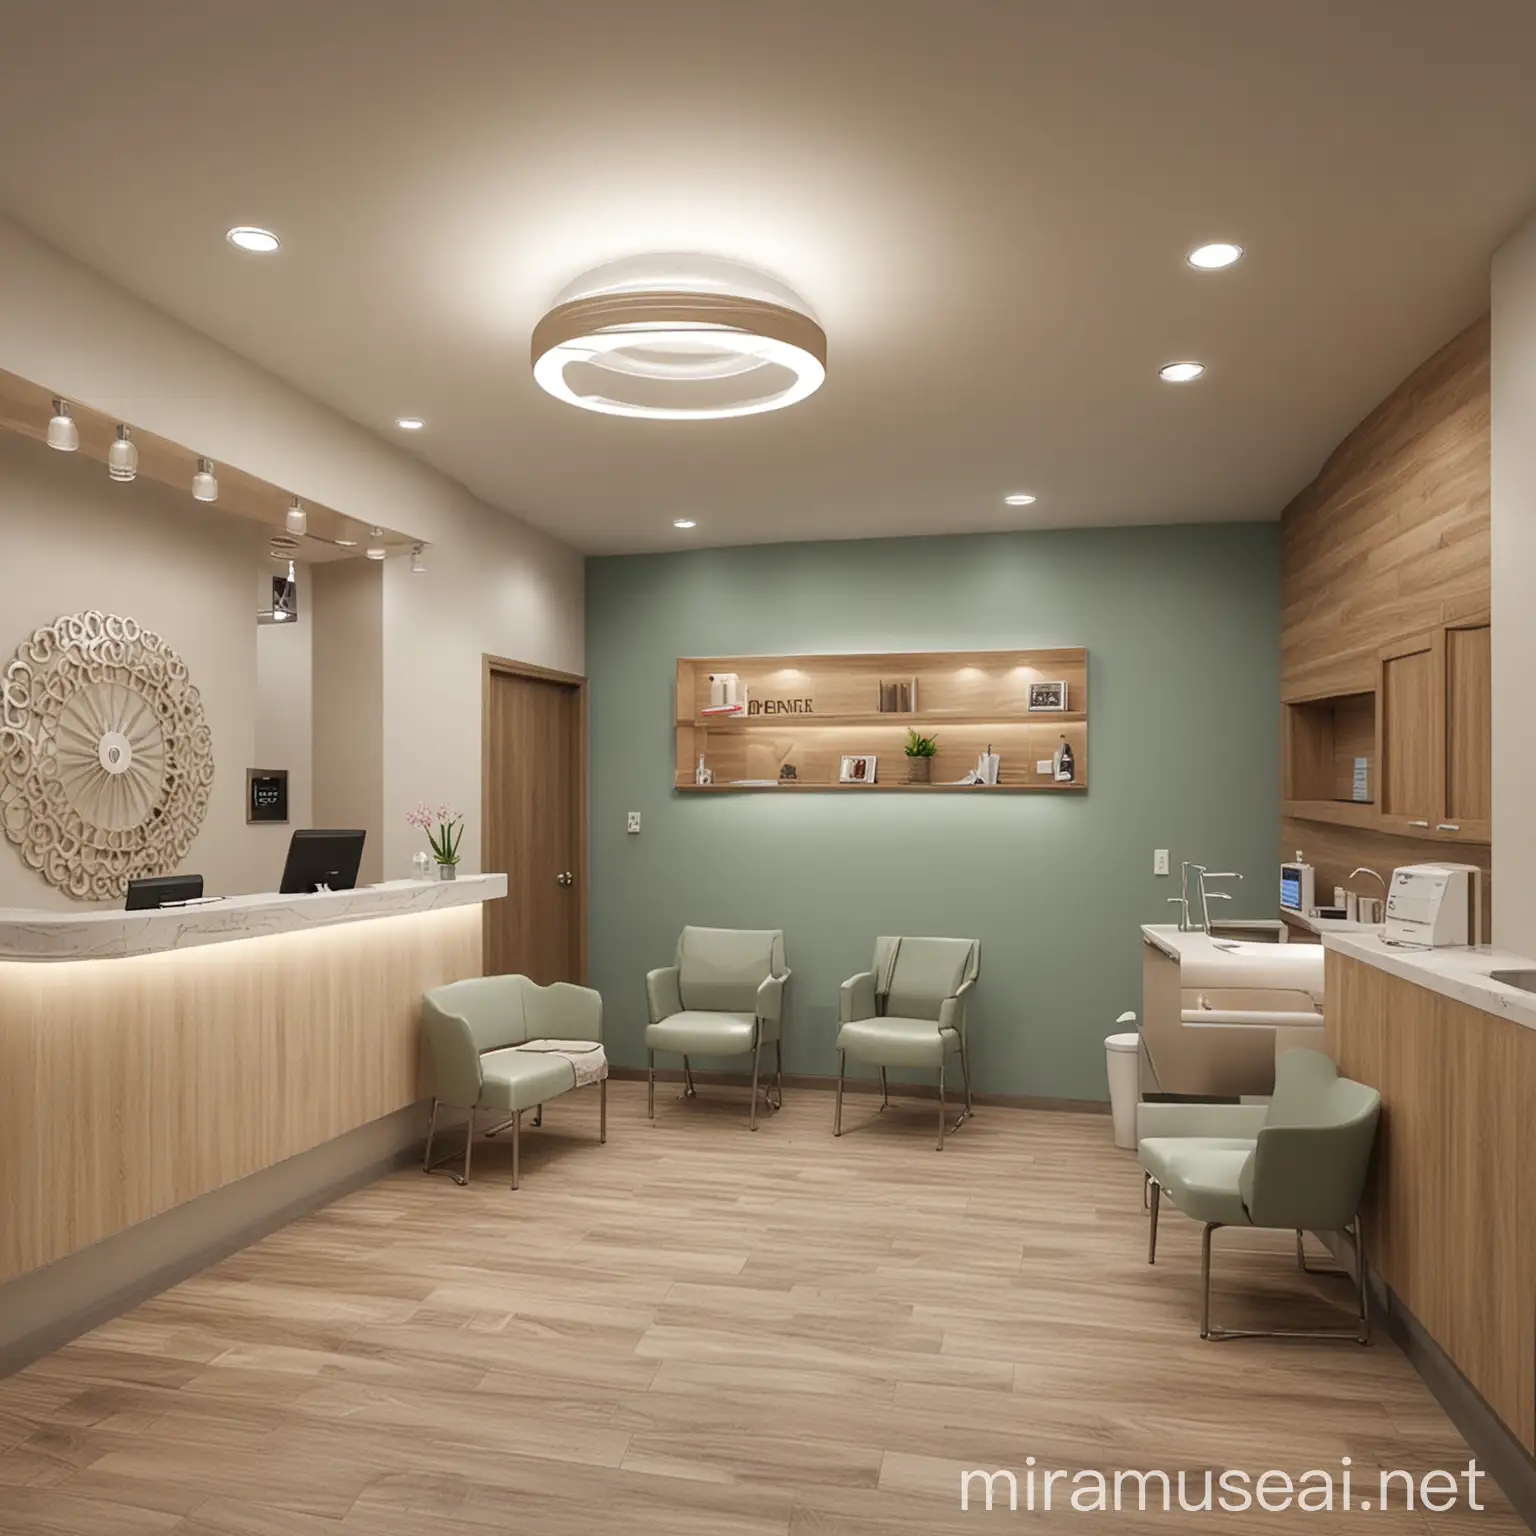 Modern Dental Clinic Interior Design Calming Atmosphere with Ergonomic Chairs